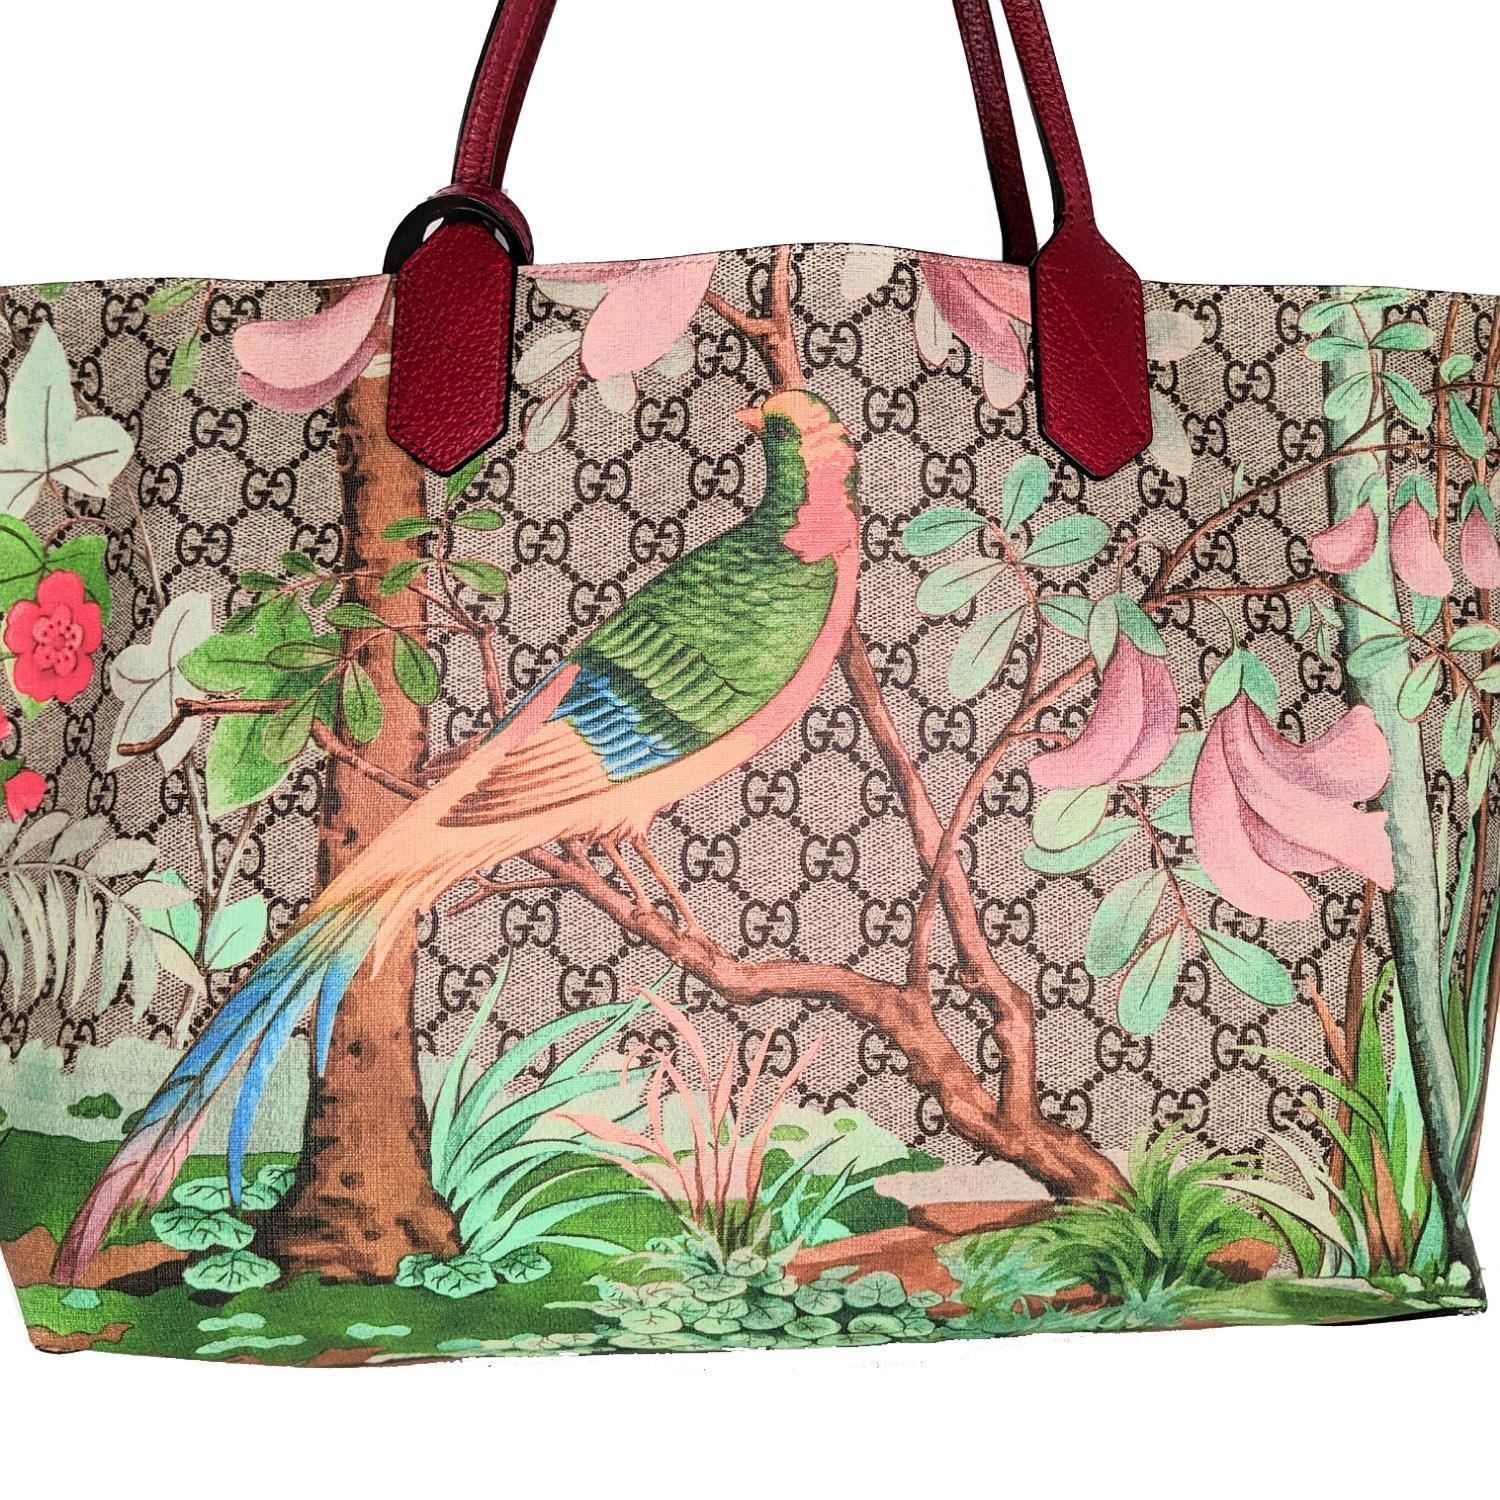 This chic tote is crafted of signature GG Supreme canvas printed with contemporary birds and greenery. The tote features red calfskin leather shoulder straps and a broad open top that reveals a spacious beige suede interior with zipper and patch